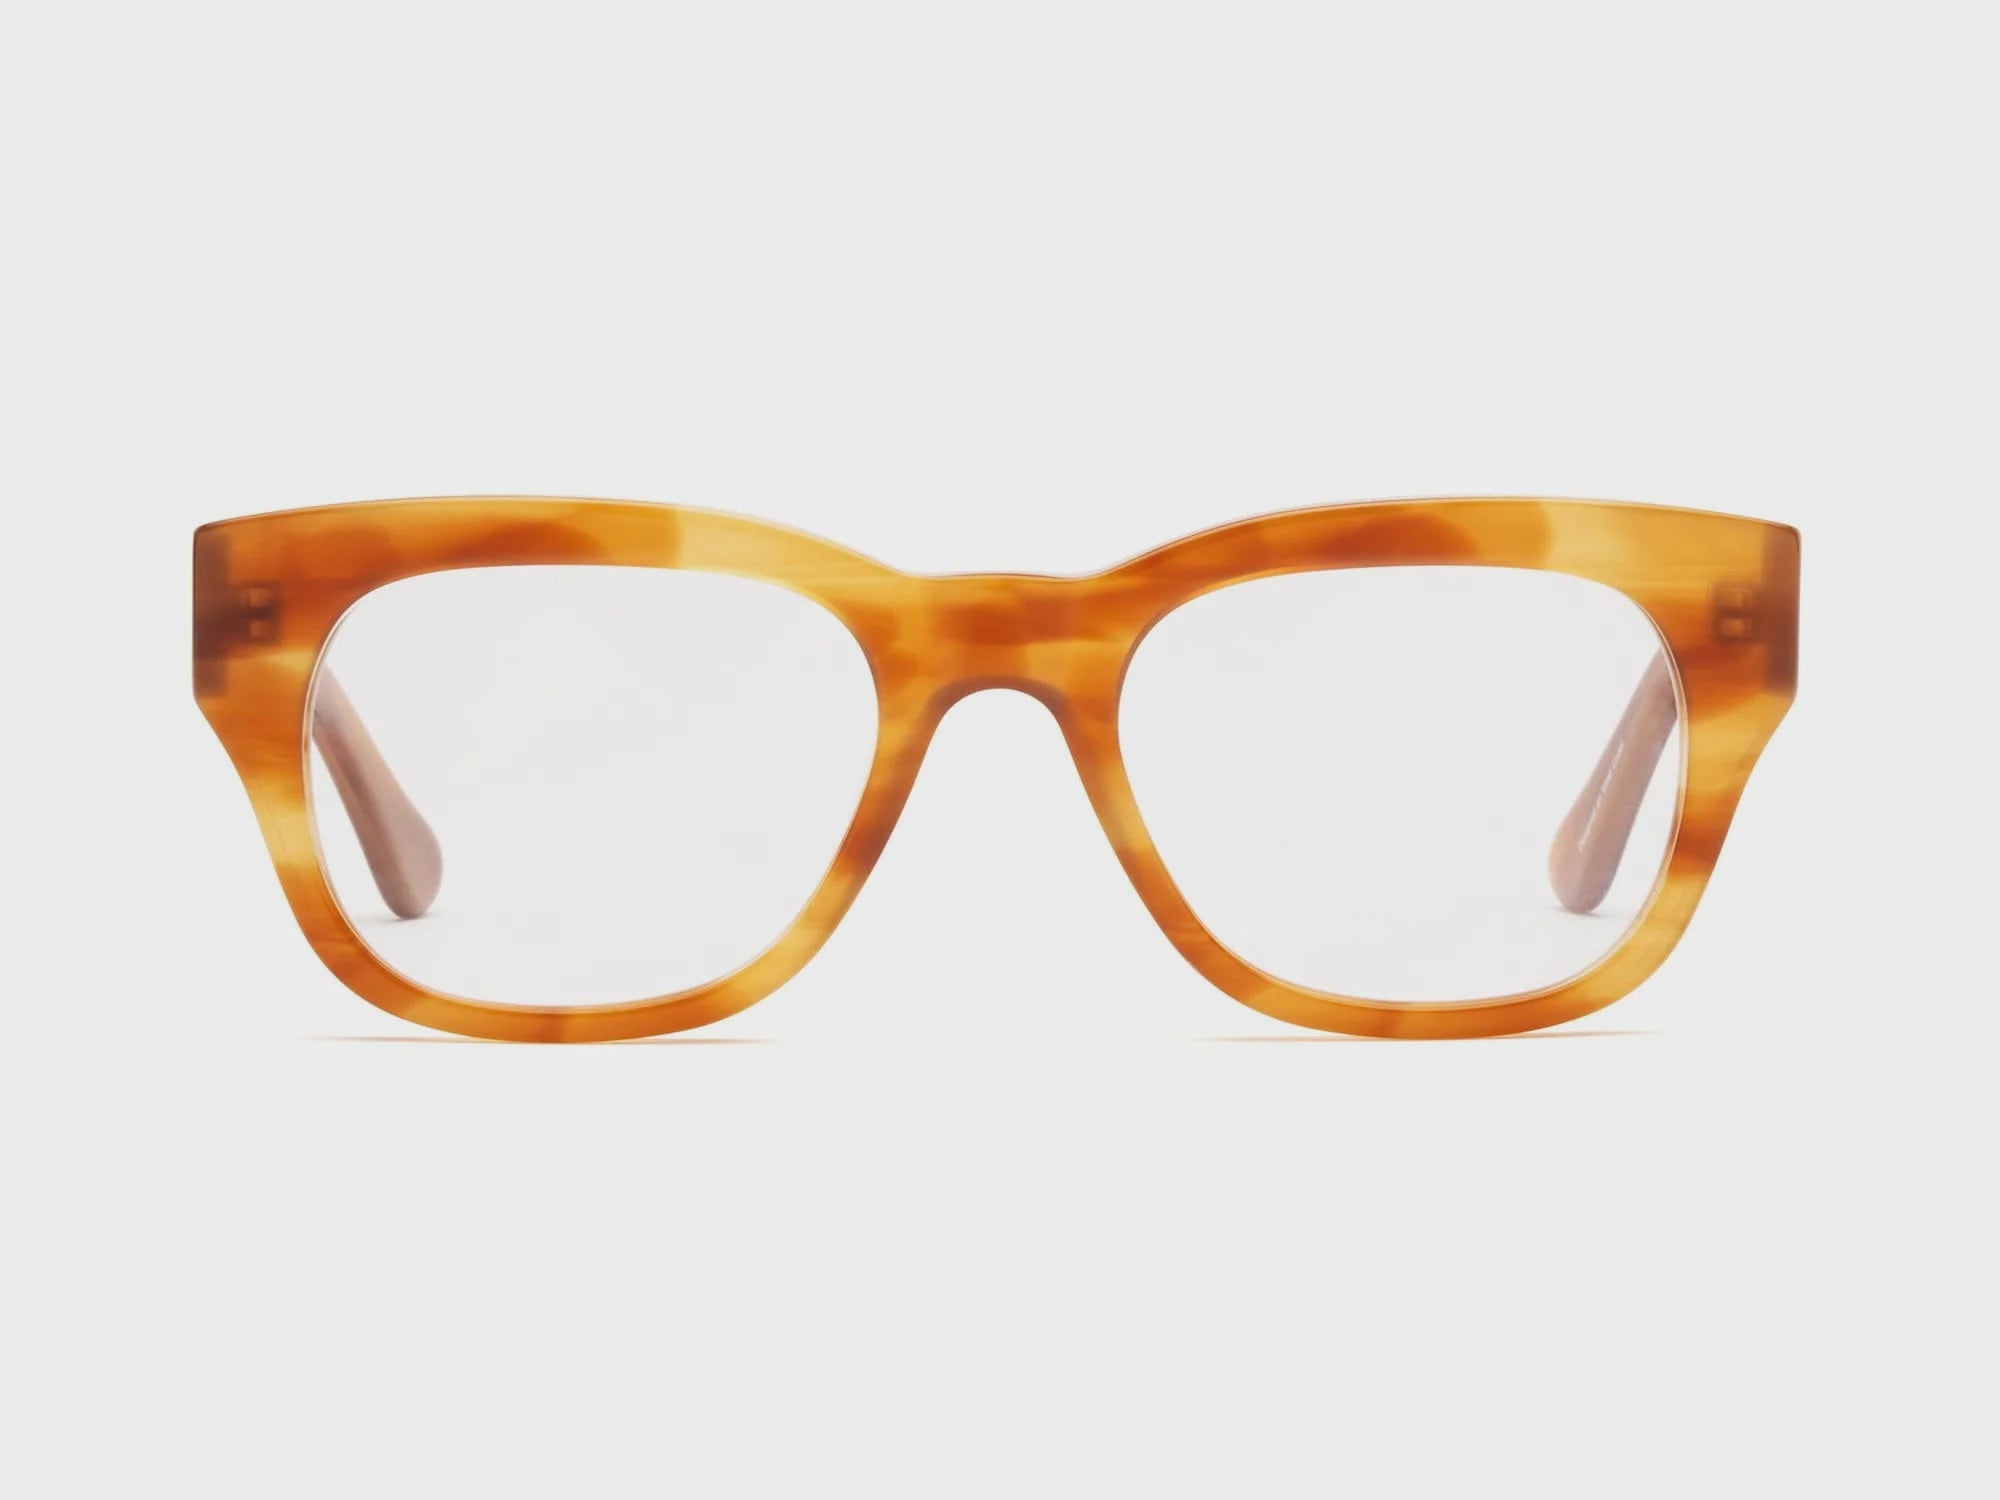 A pair of oversized, translucent amber-colored square frame glasses with a thick frame, isolated on a white background from Caddis Miklos Tabby.